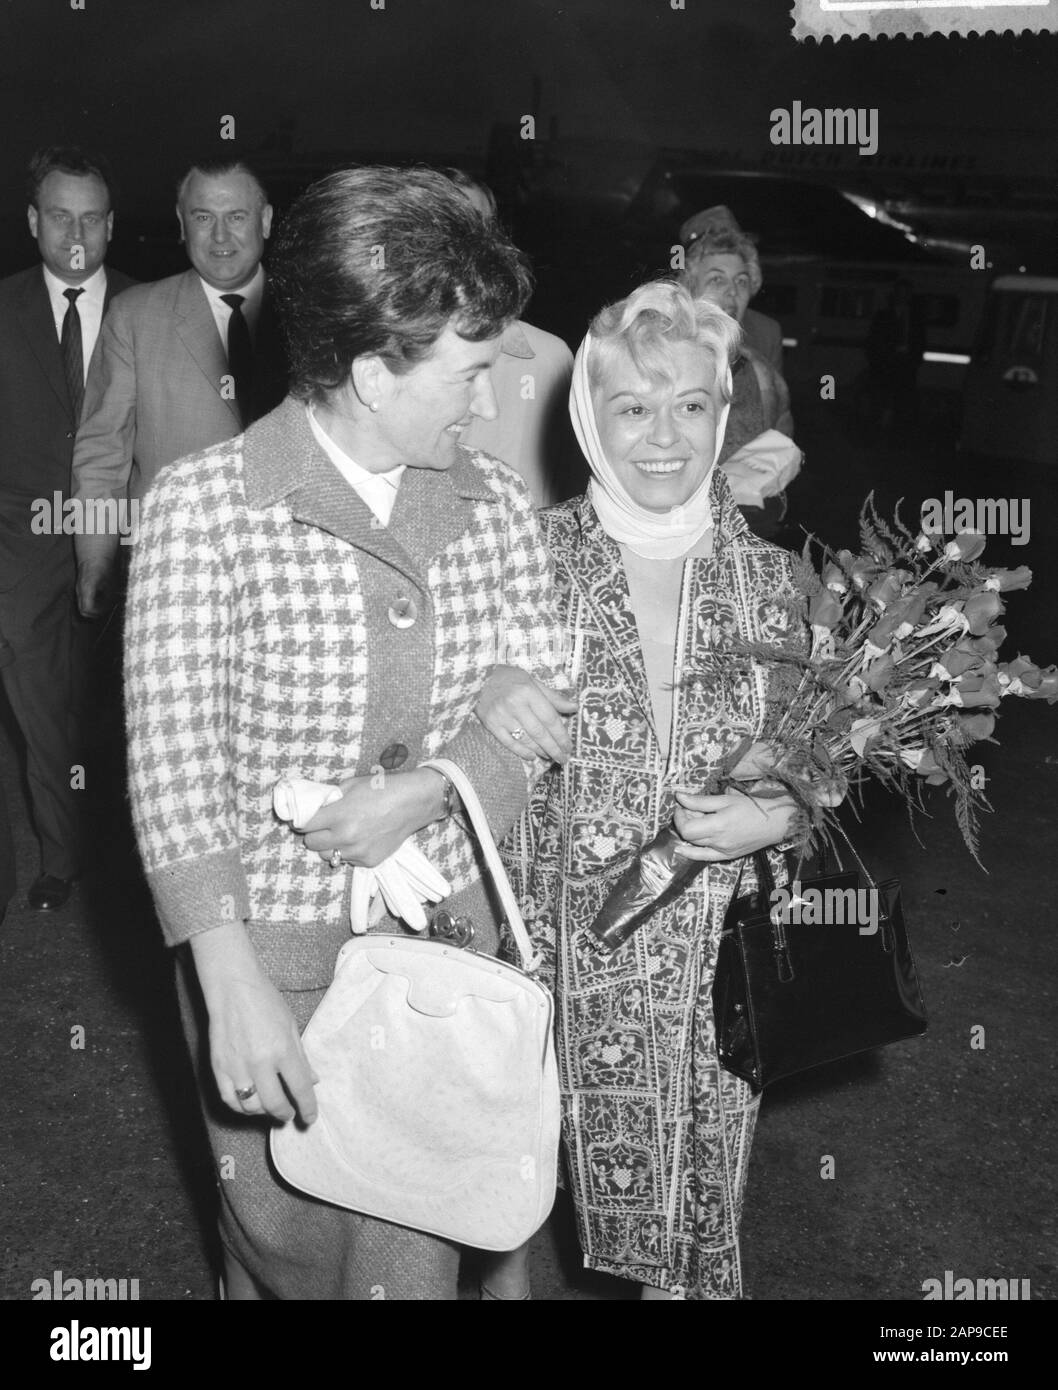 Arrival Italian director Federico Fellini and his wife the actress Giulietta Masina at Schiphol Airport. Giulllieta Masina (right) on the way to the arrivals hall Date: 9 June 1960 Location: Noord-Holland, Schiphol Keywords: arrivals, actresses, film directors, film stars, press conferences Personal name: Fellini Federico, Masina, Giullieta Stock Photo